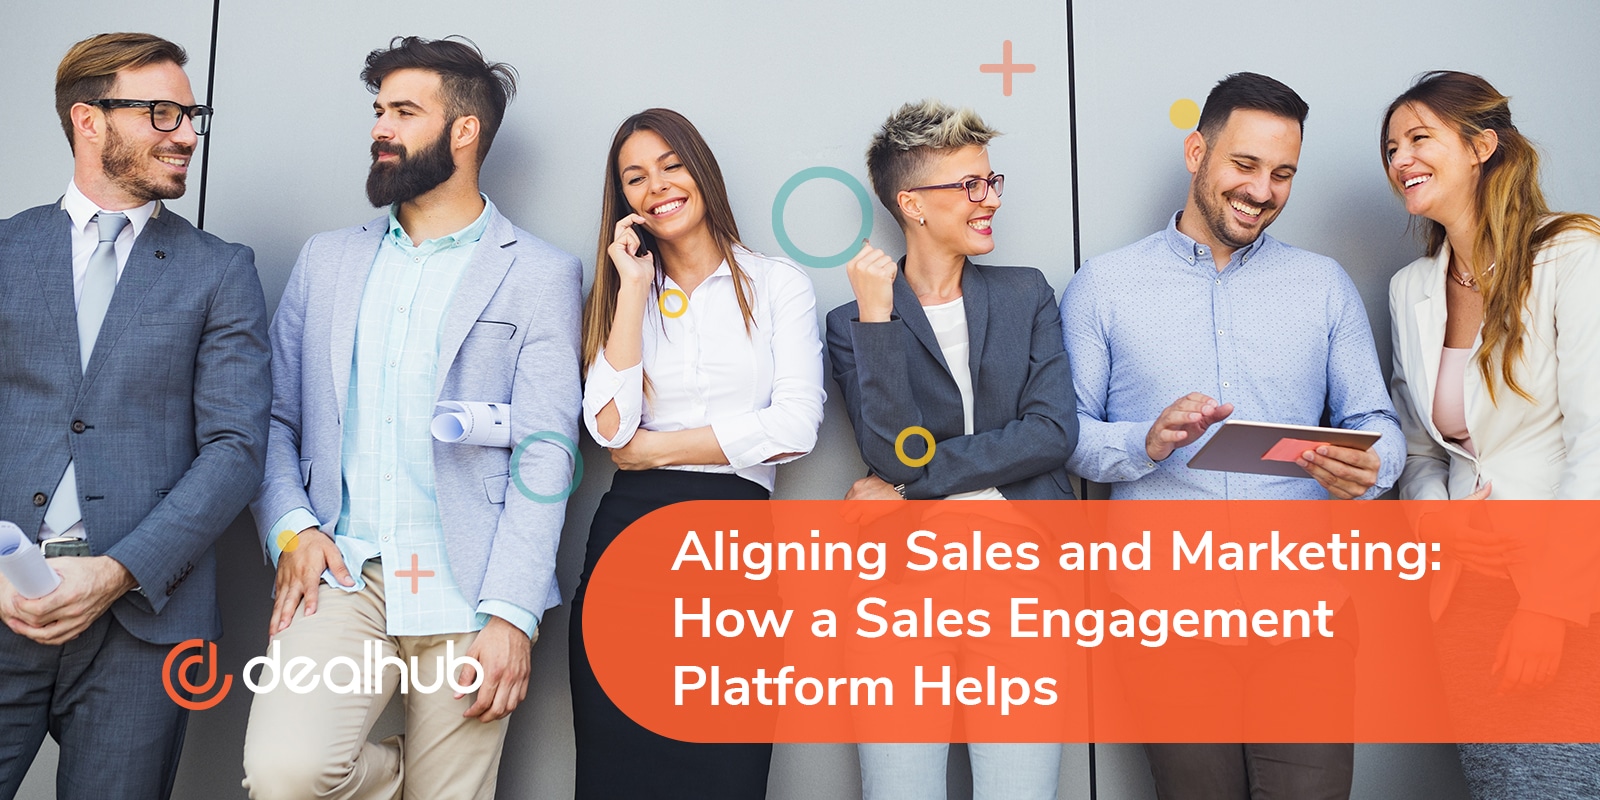 Aligning Sales and Marketing How a Sales Engagement Platform Helps